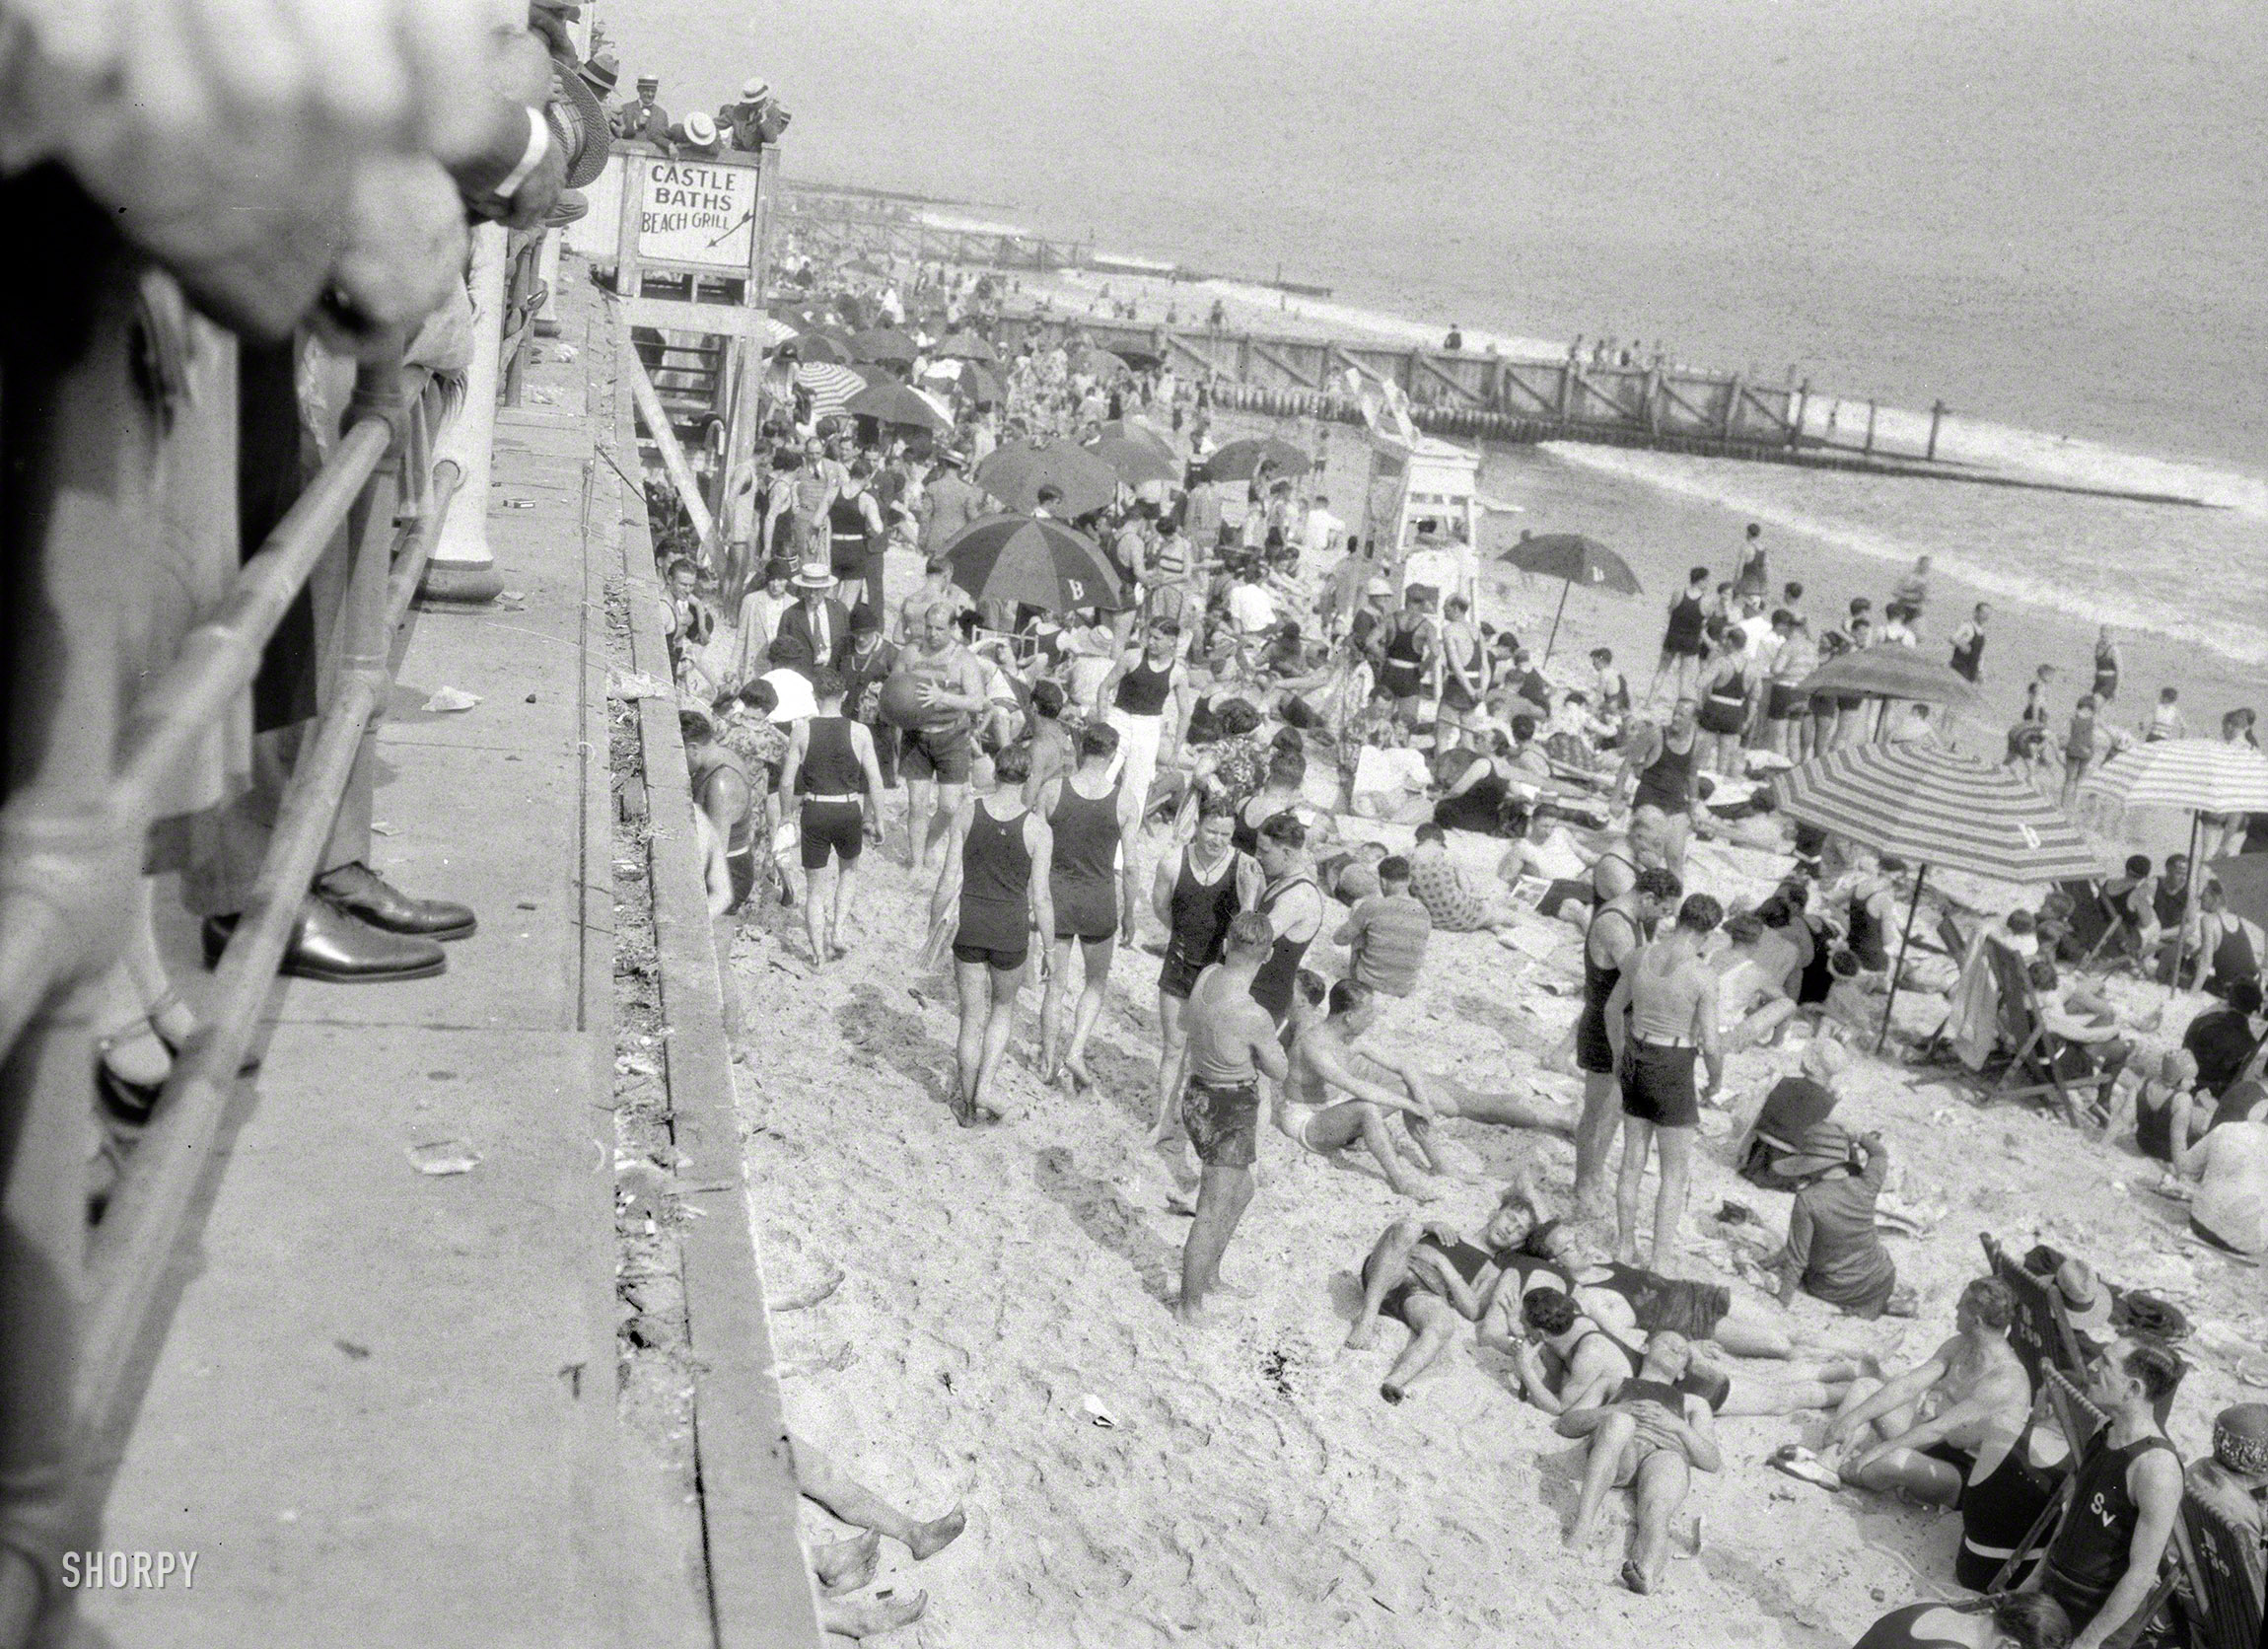 1927. "New York City views -- bathers at Long Beach. For the New York Times." Wingtips optional. 4x5 inch nitrate negative by Arnold Genthe. View full size.